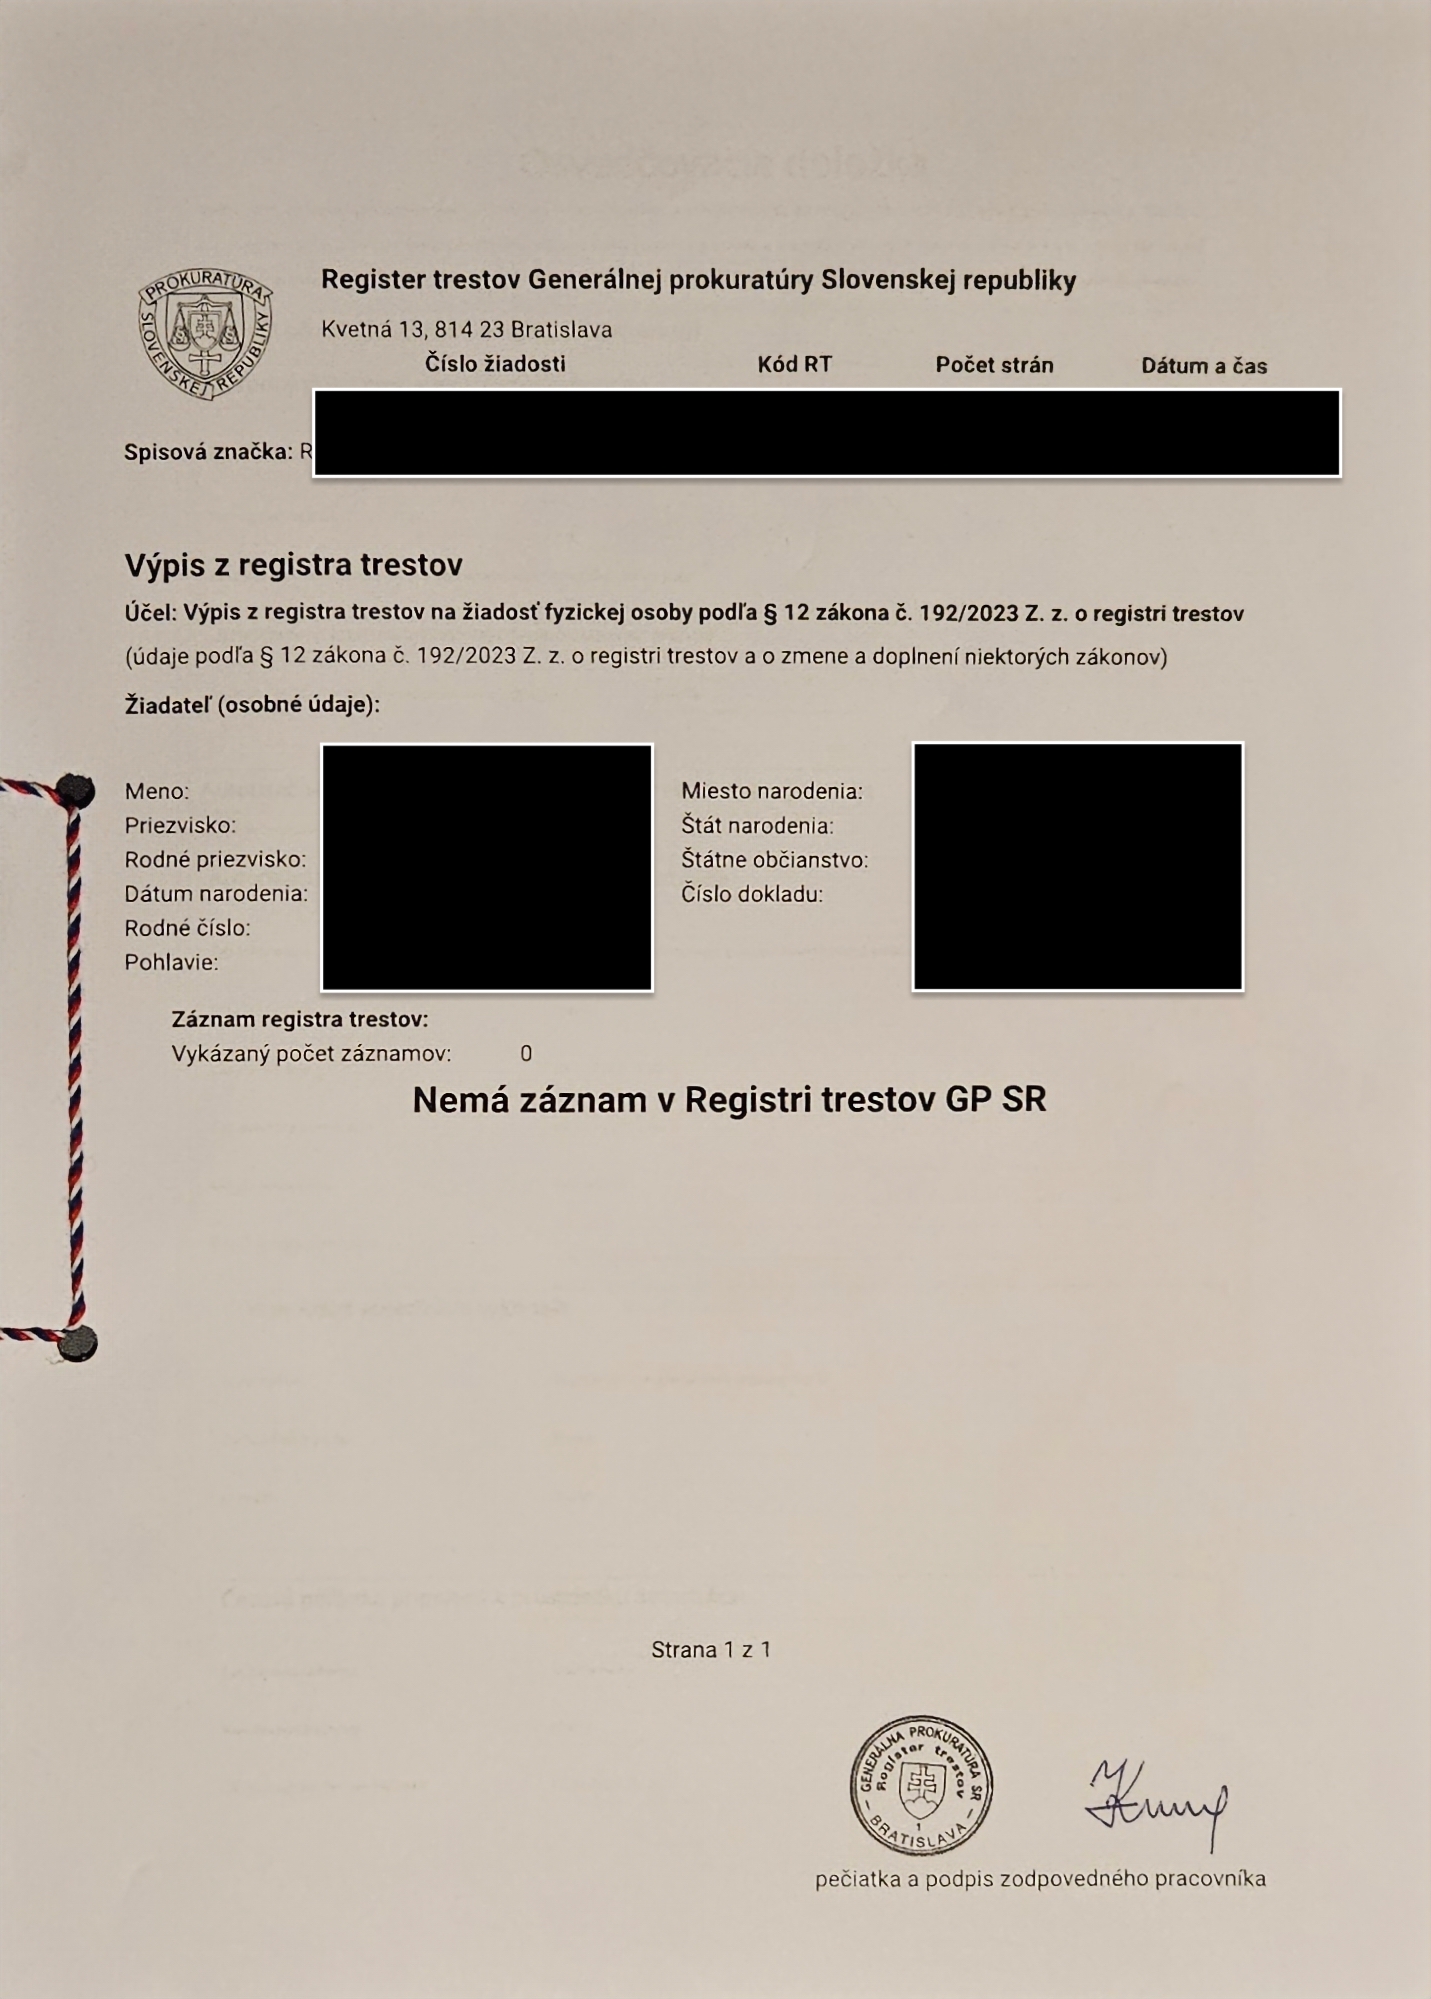 Certified Translation of Slovakian Criminal Record from Slovak to English